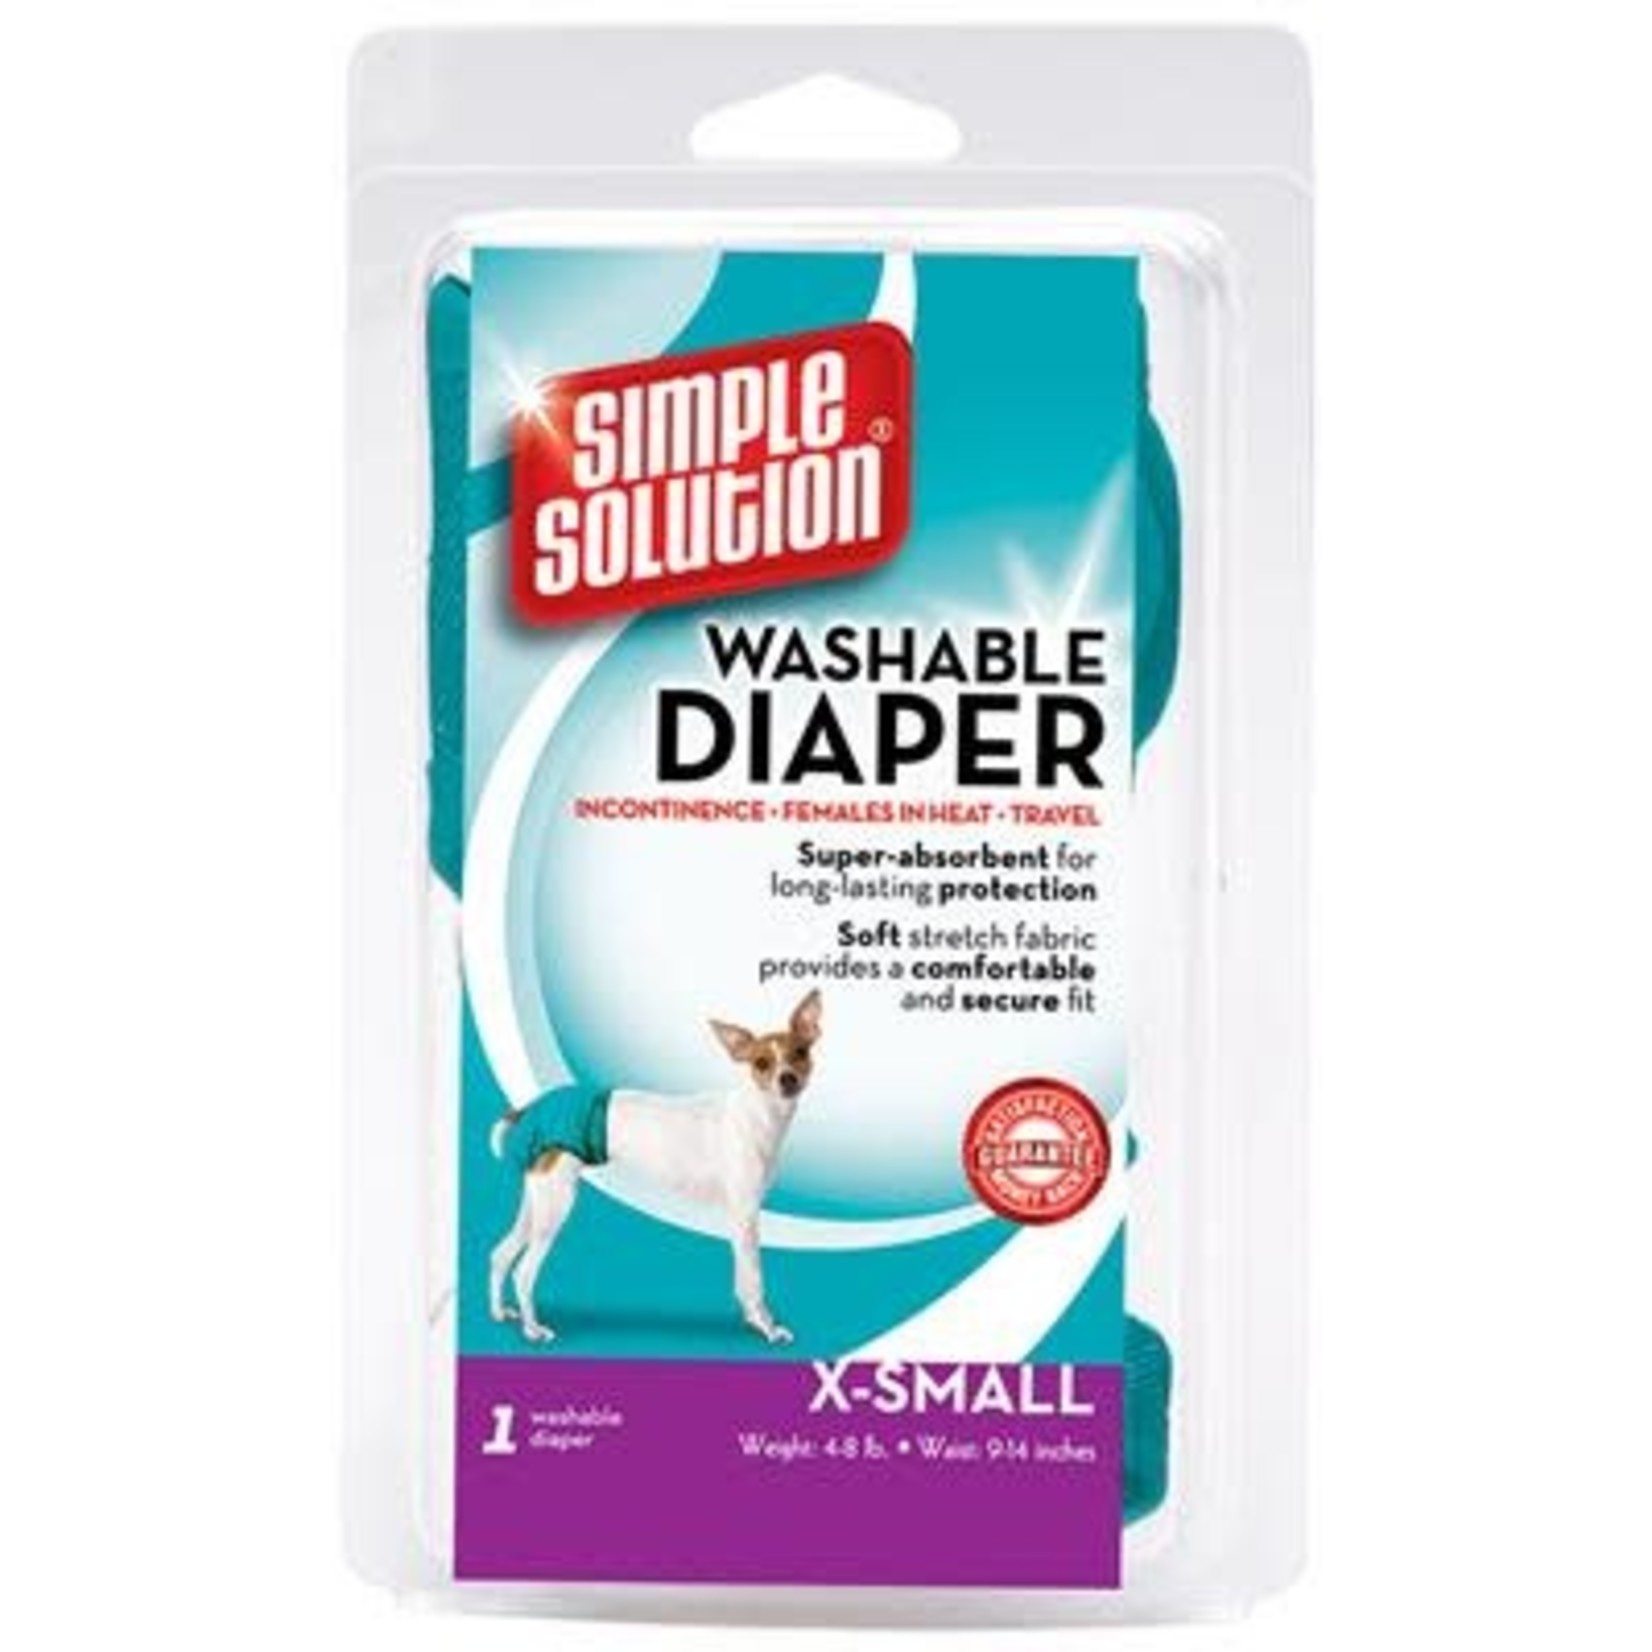 Simple Solutions Washable Female Diaper XSmall